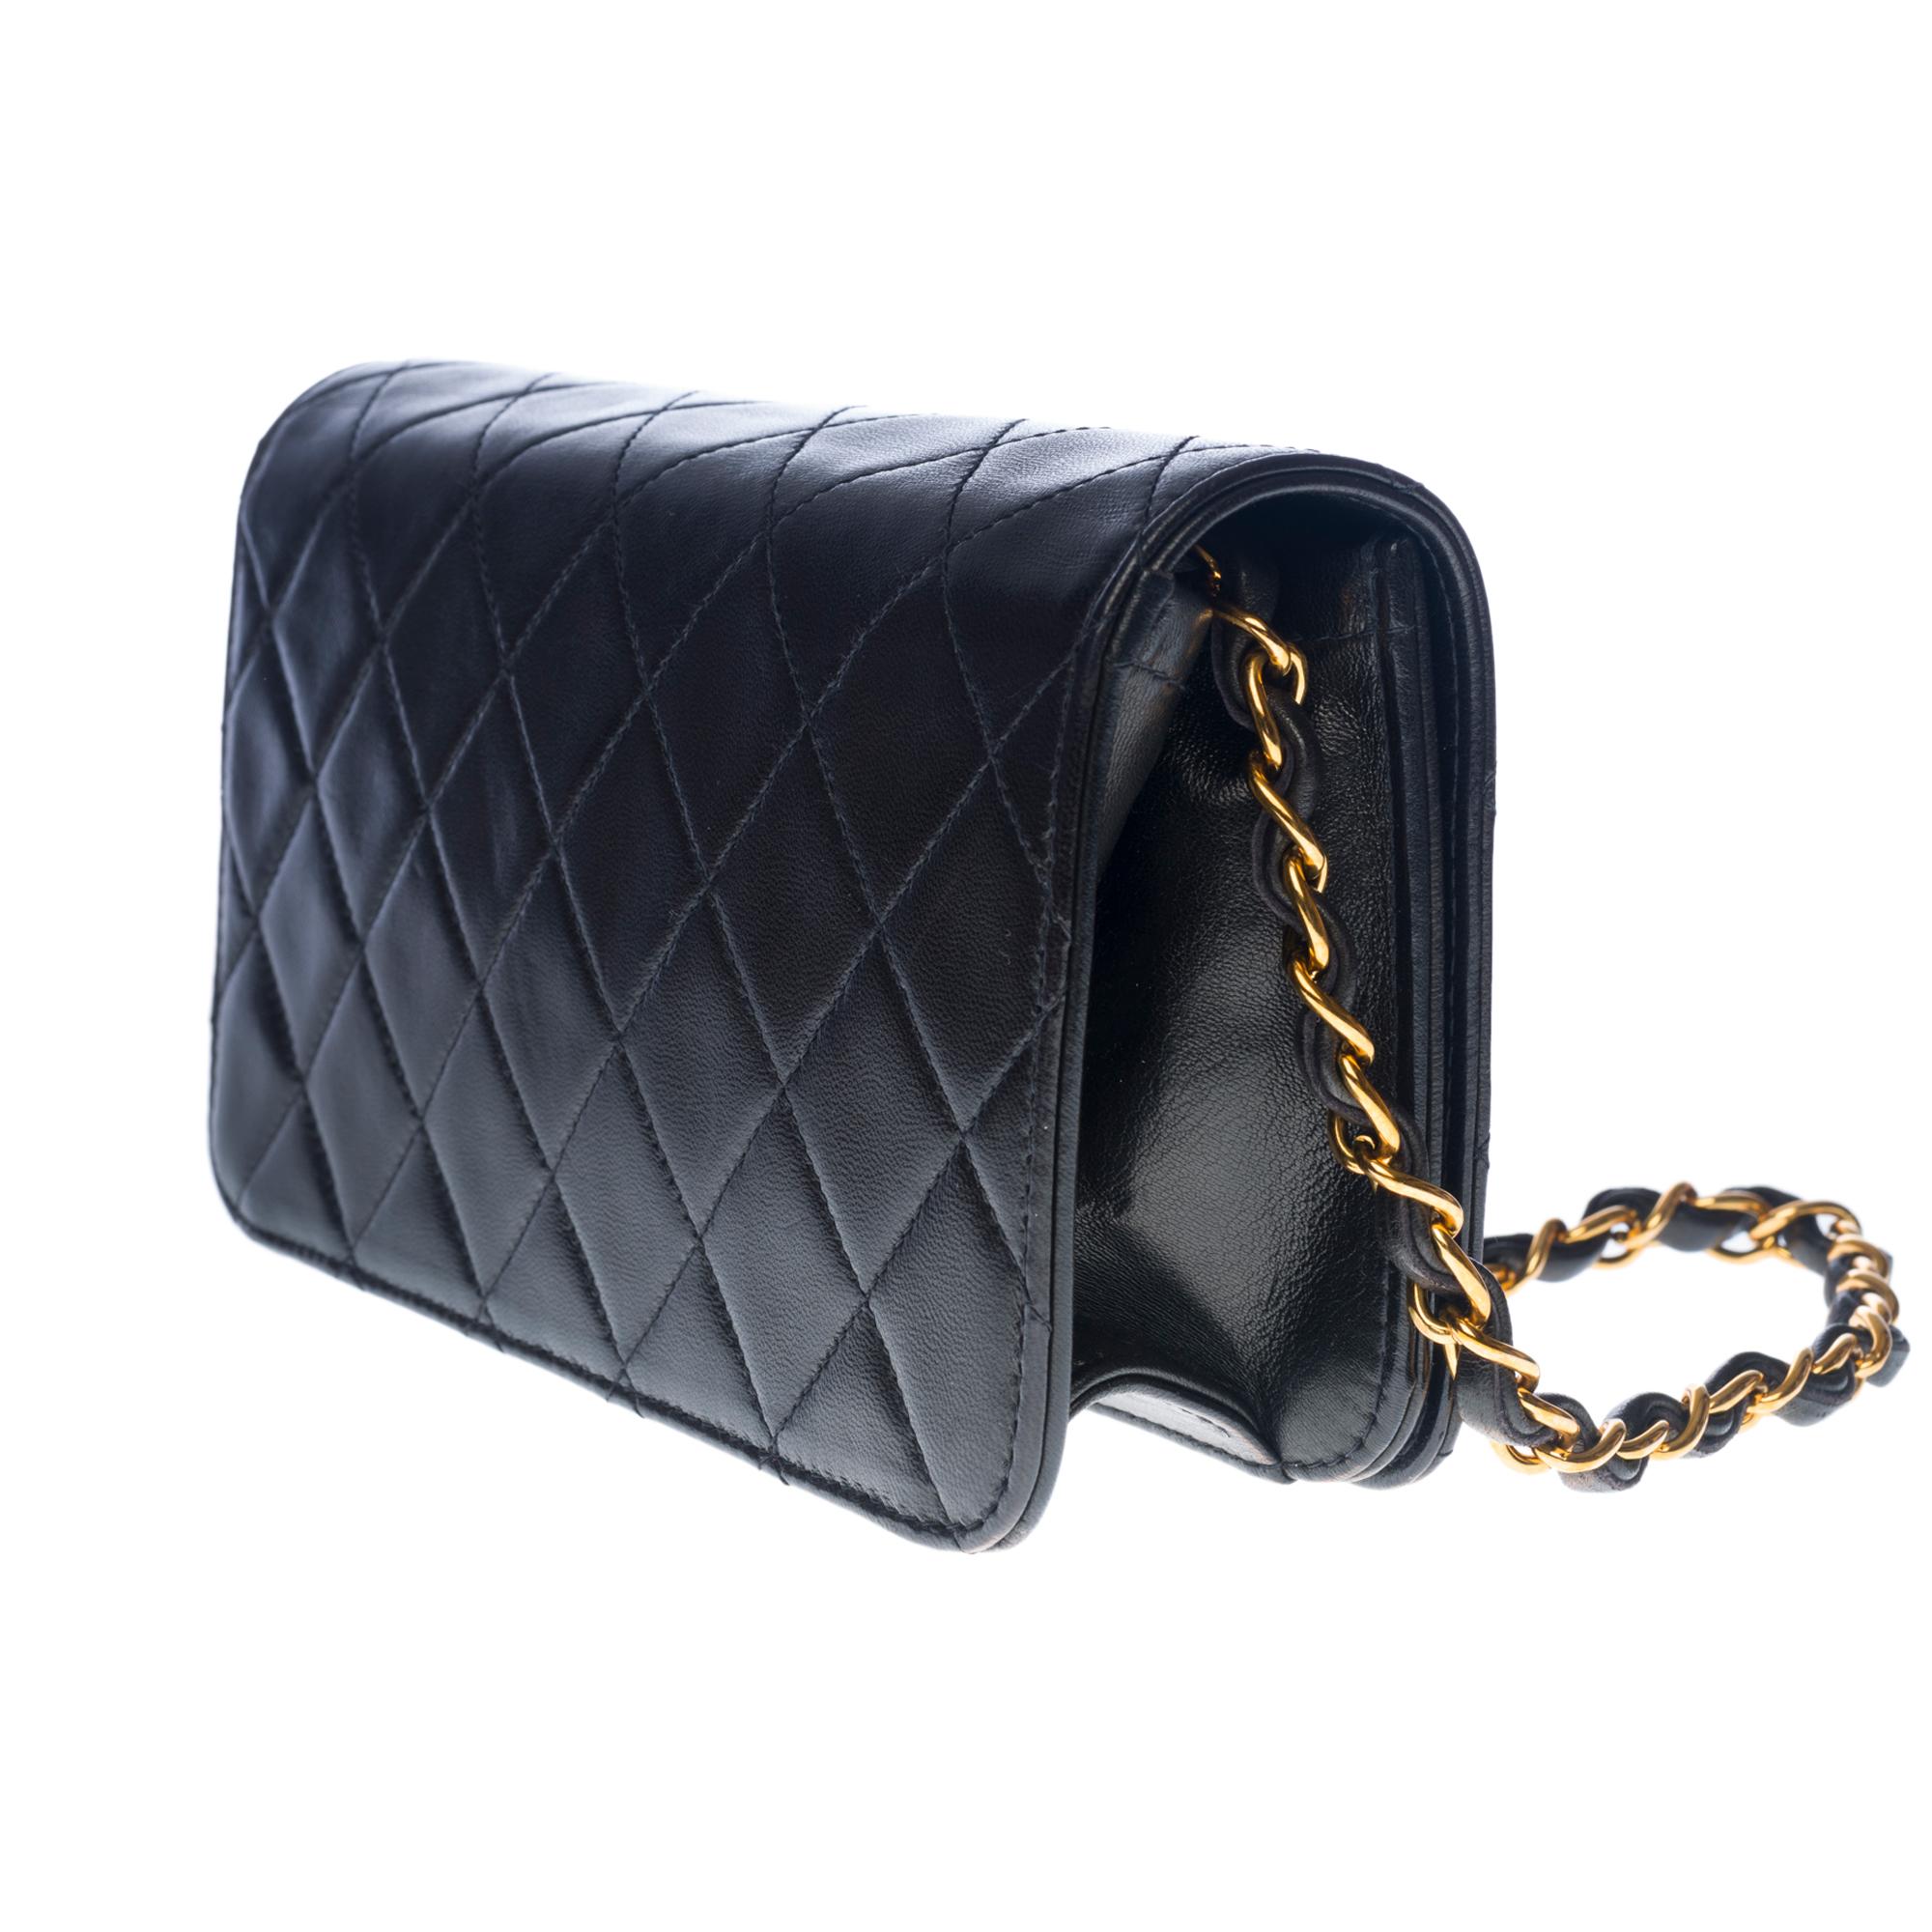 Women's Chanel Classic Mini Full Flap shoulder bag in black quilted lambskin leather, GHW